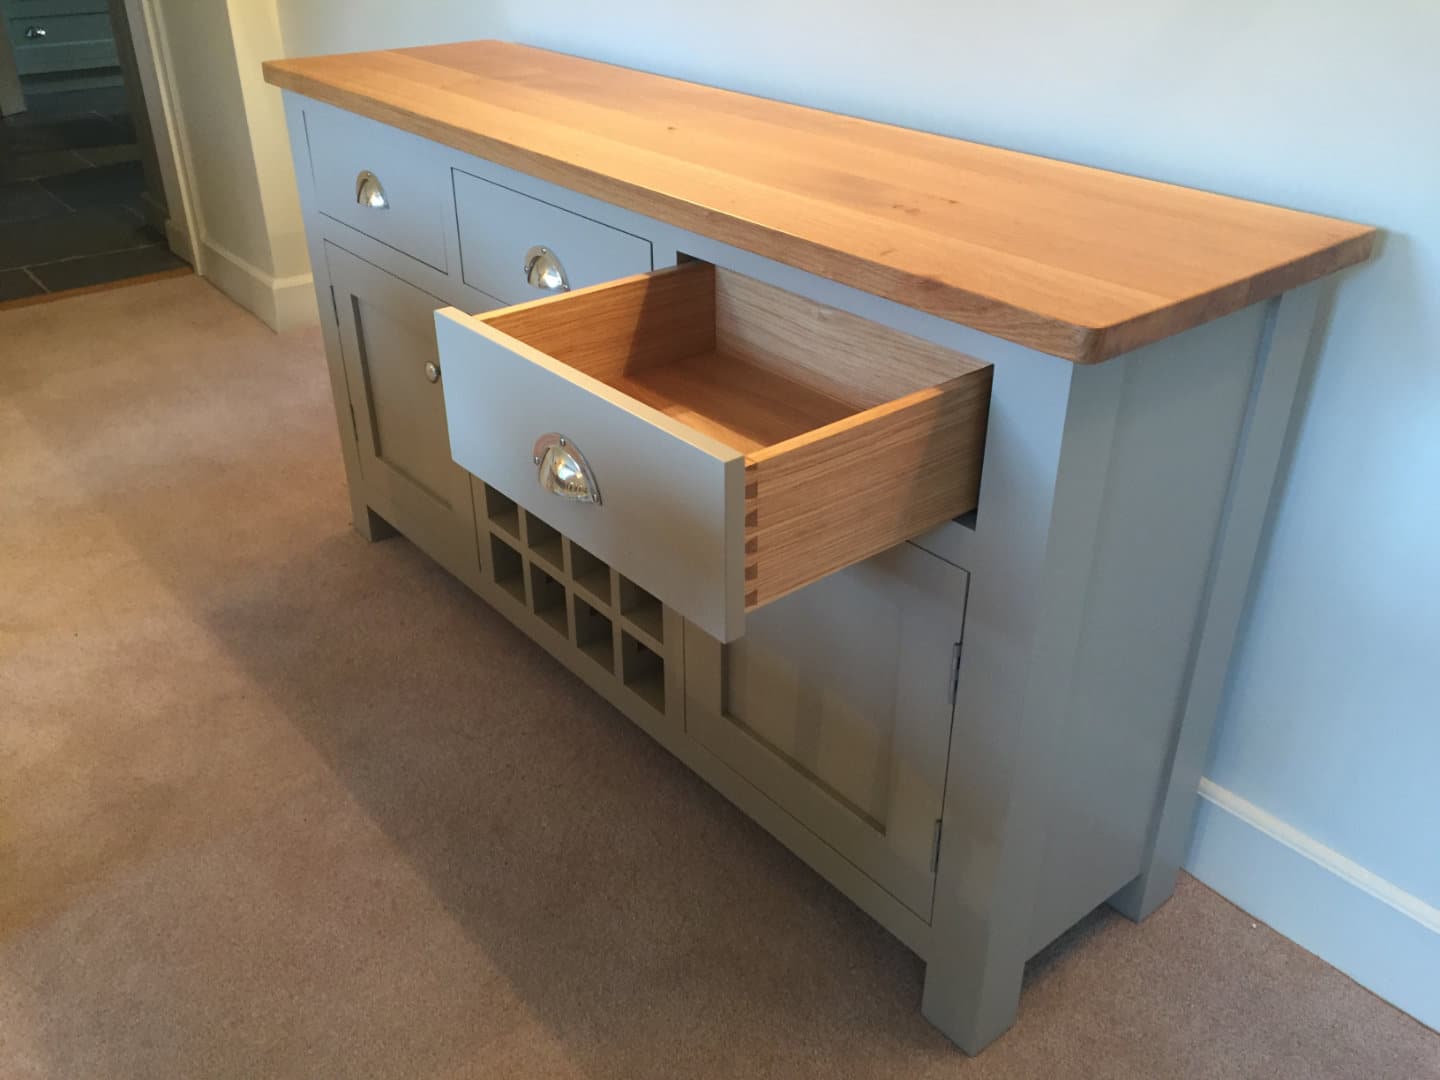 A beautiful wooden sideboard with on of it's drawers open